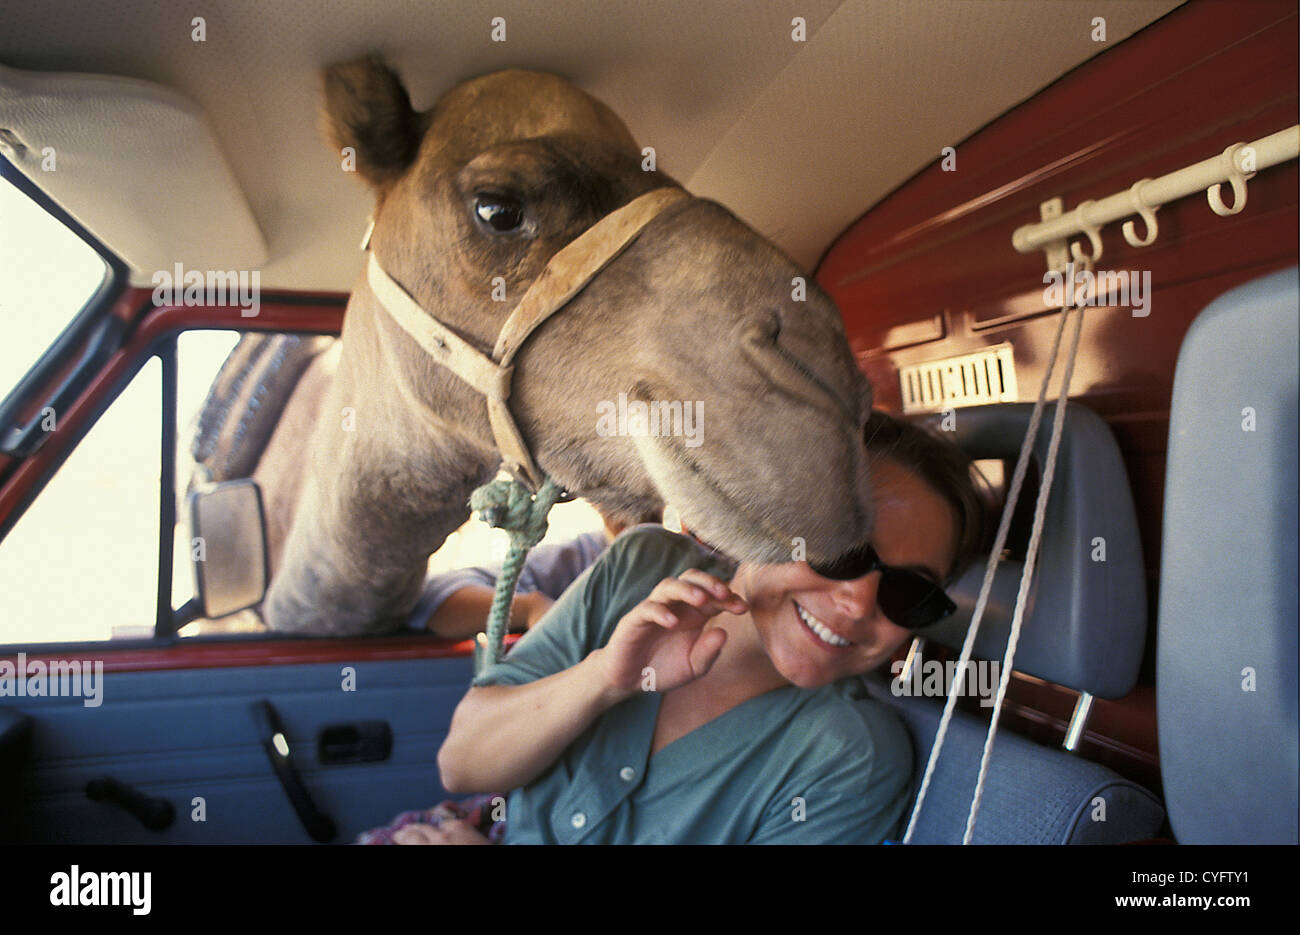 Morocco, Tinerhir, Oasis, Camel greets tourist in car, portrait Stock Photo